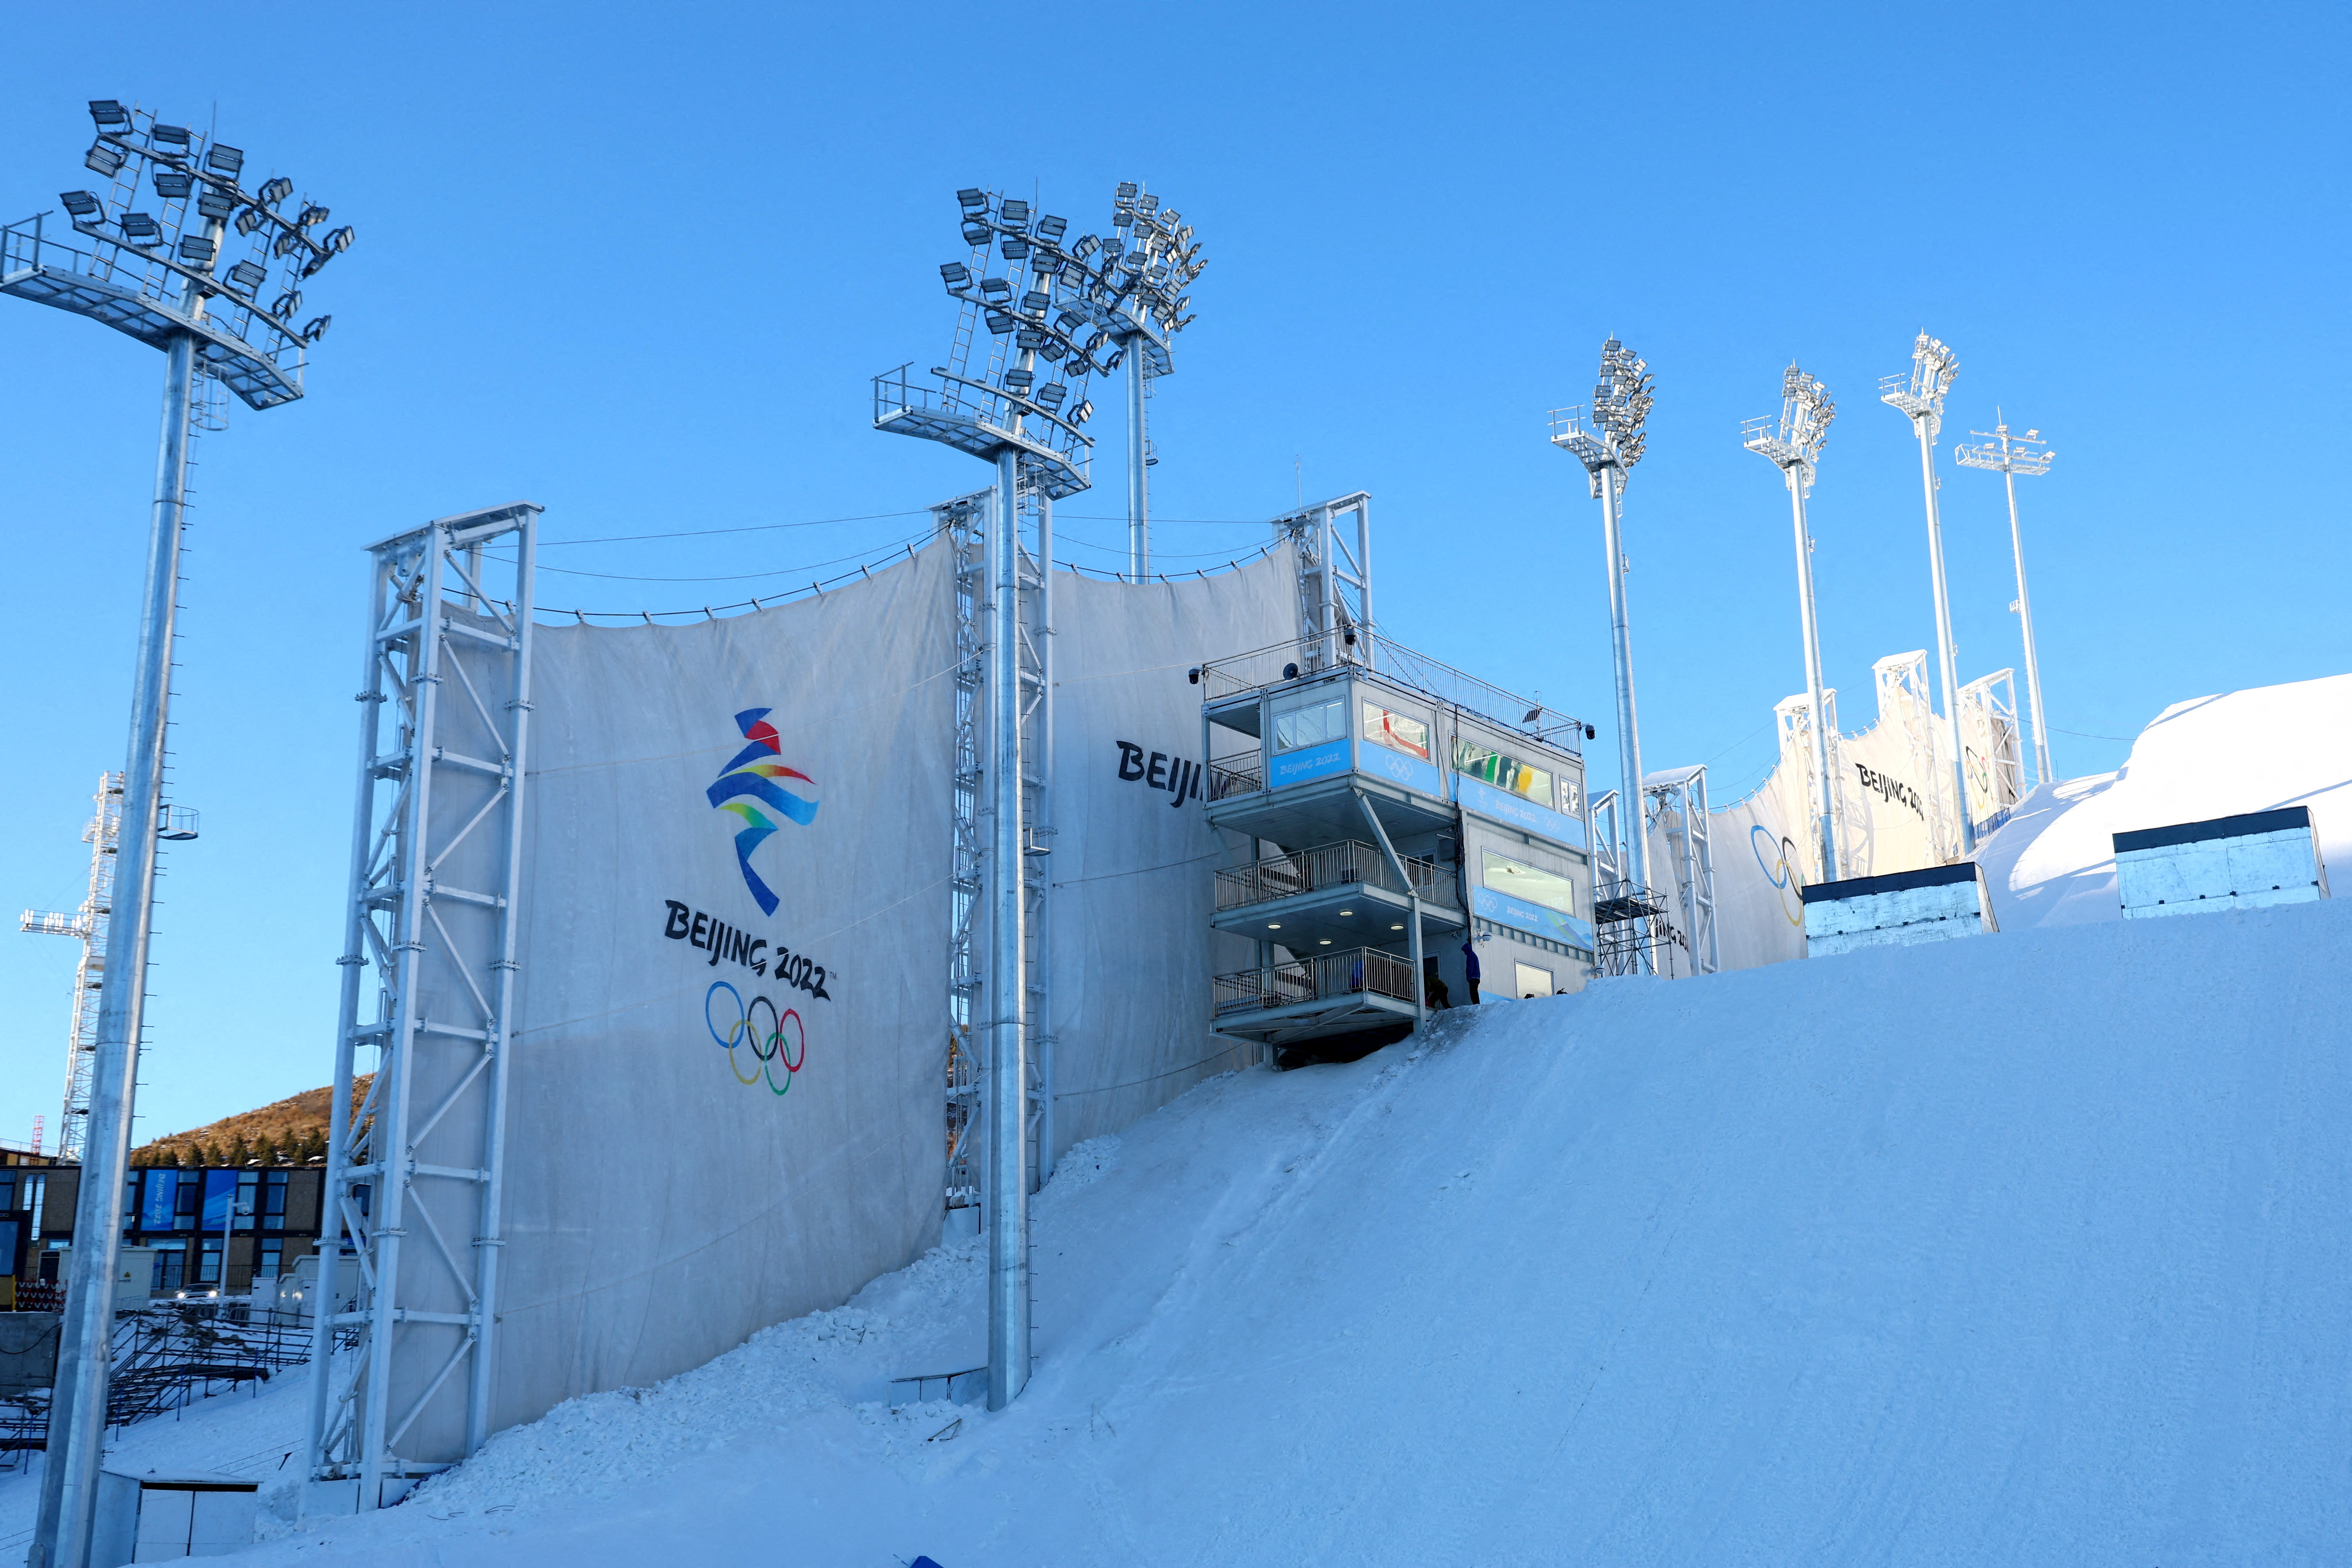 Genting Snow Park, a competition venue for Snowboarding and Freestyle Skiing during the Beijing 2022 Winter Olympics, is seen in Beijing